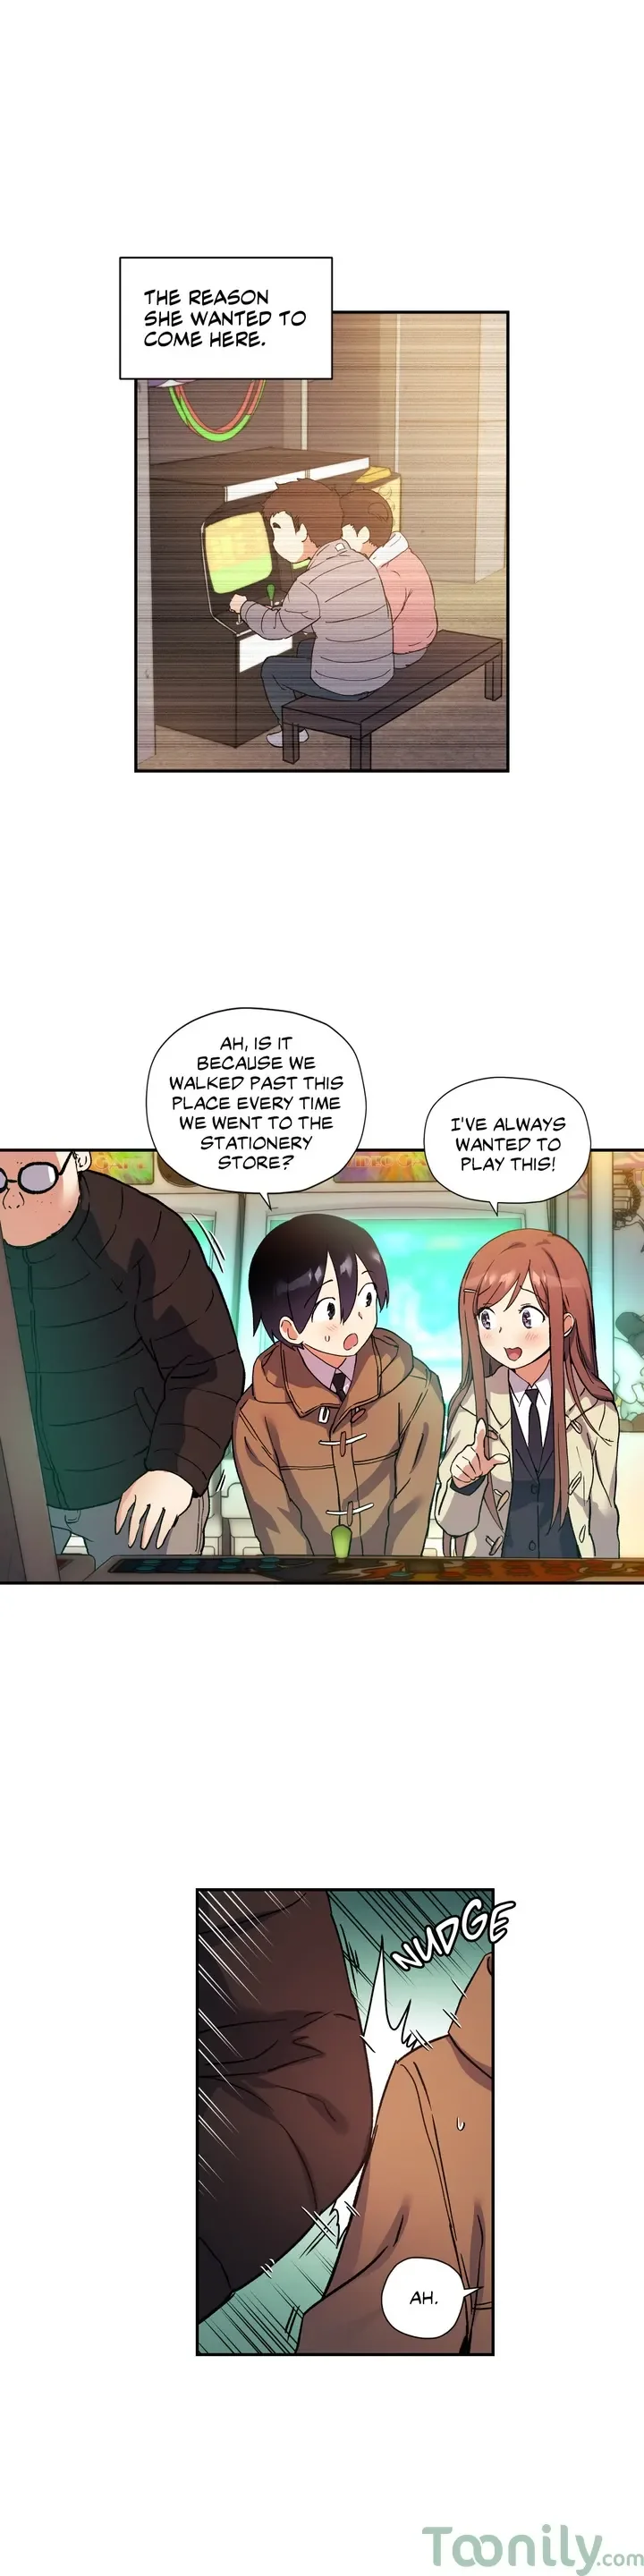 under-observation-my-first-loves-and-i-chap-35-10